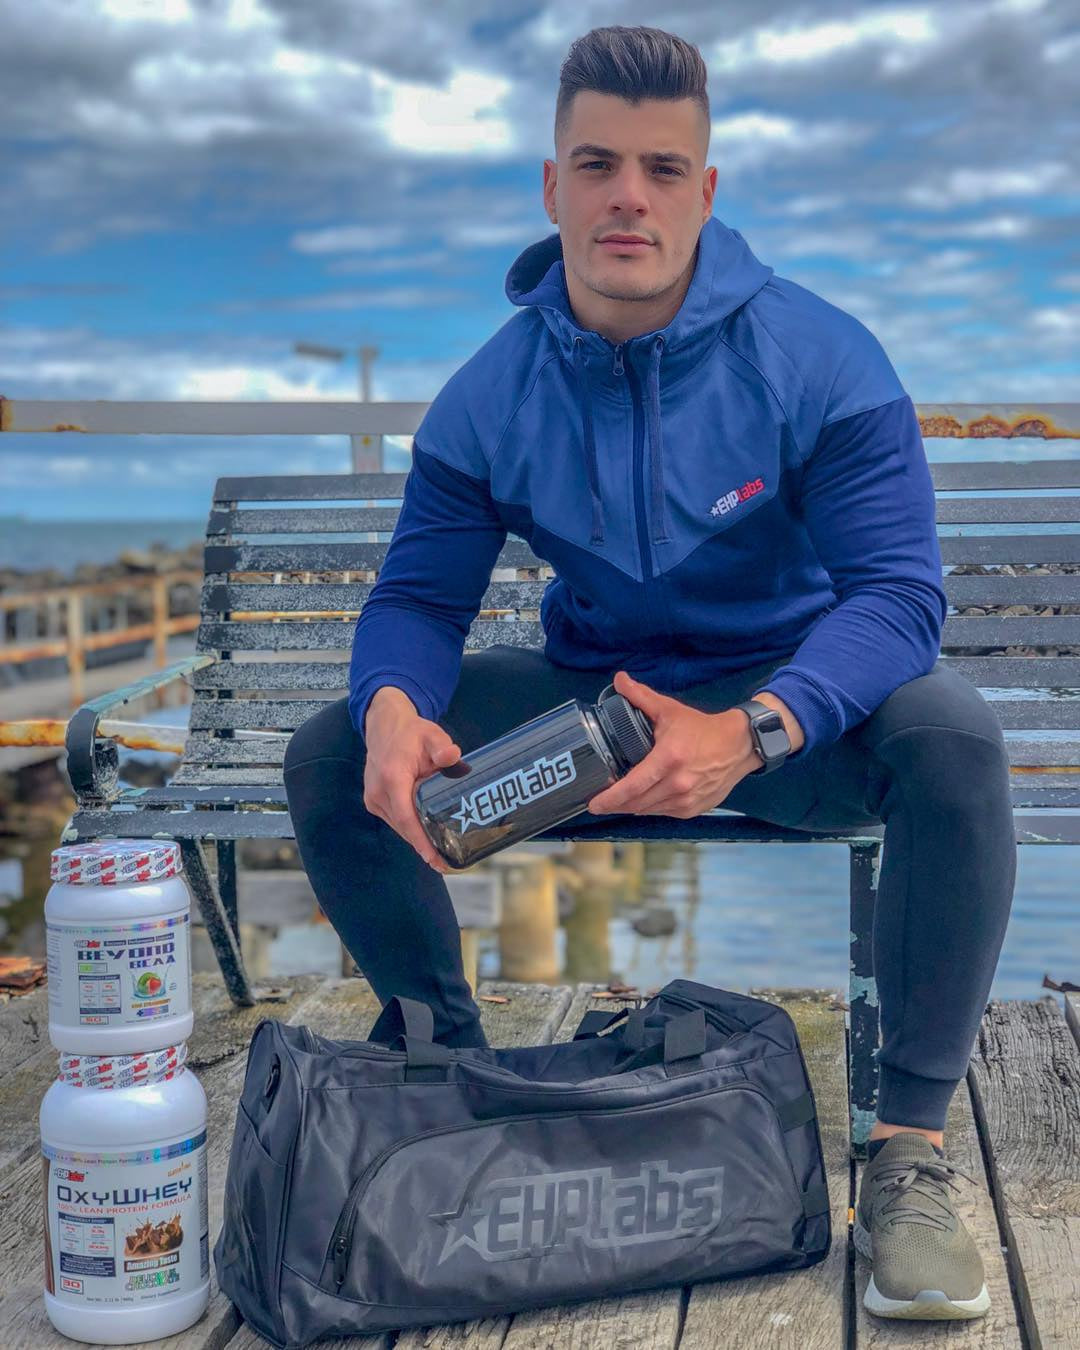 My Top 3 Beyond BCAA Benefits by Nick P.-EHPlabs